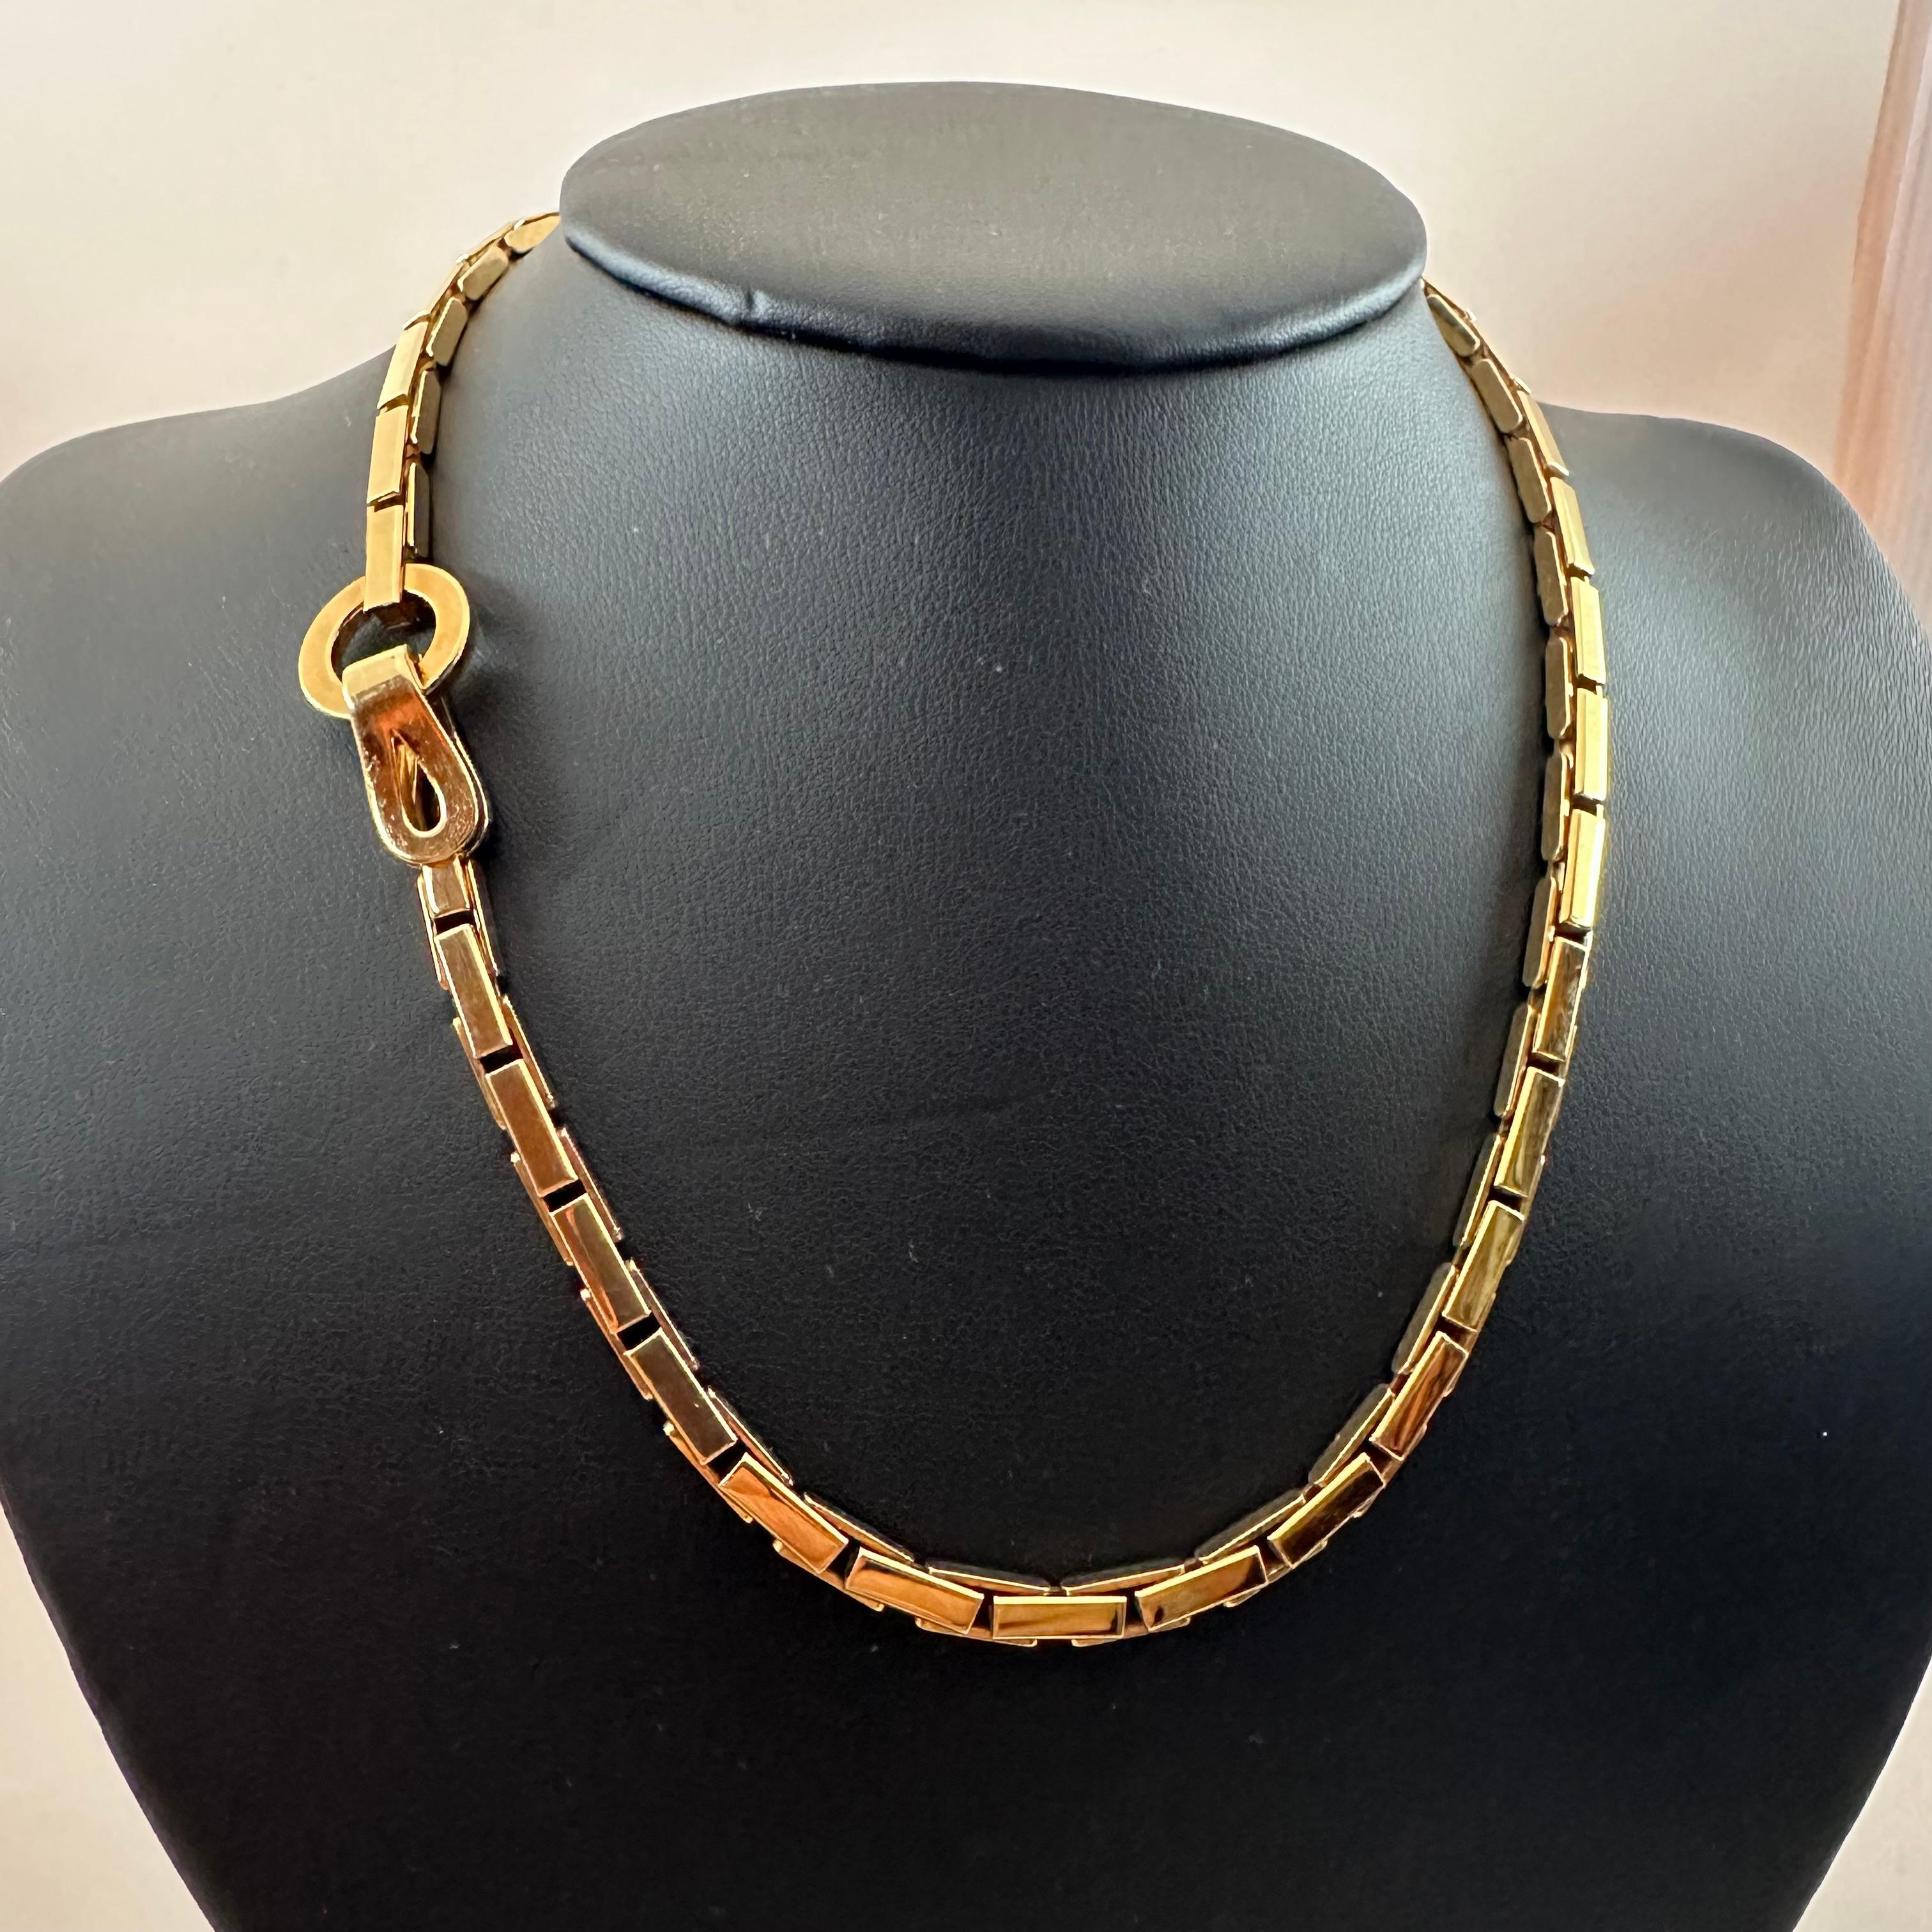 Cartier’s Agrafe Collection Necklace made in 18k yellow gold. Agrafe is based on a unique clasp, consisting of a circle and hook This one is 17 inches long and 67 grams of 18k Yellow Gold. Stamped Cartier and numbered.  Circa 2000